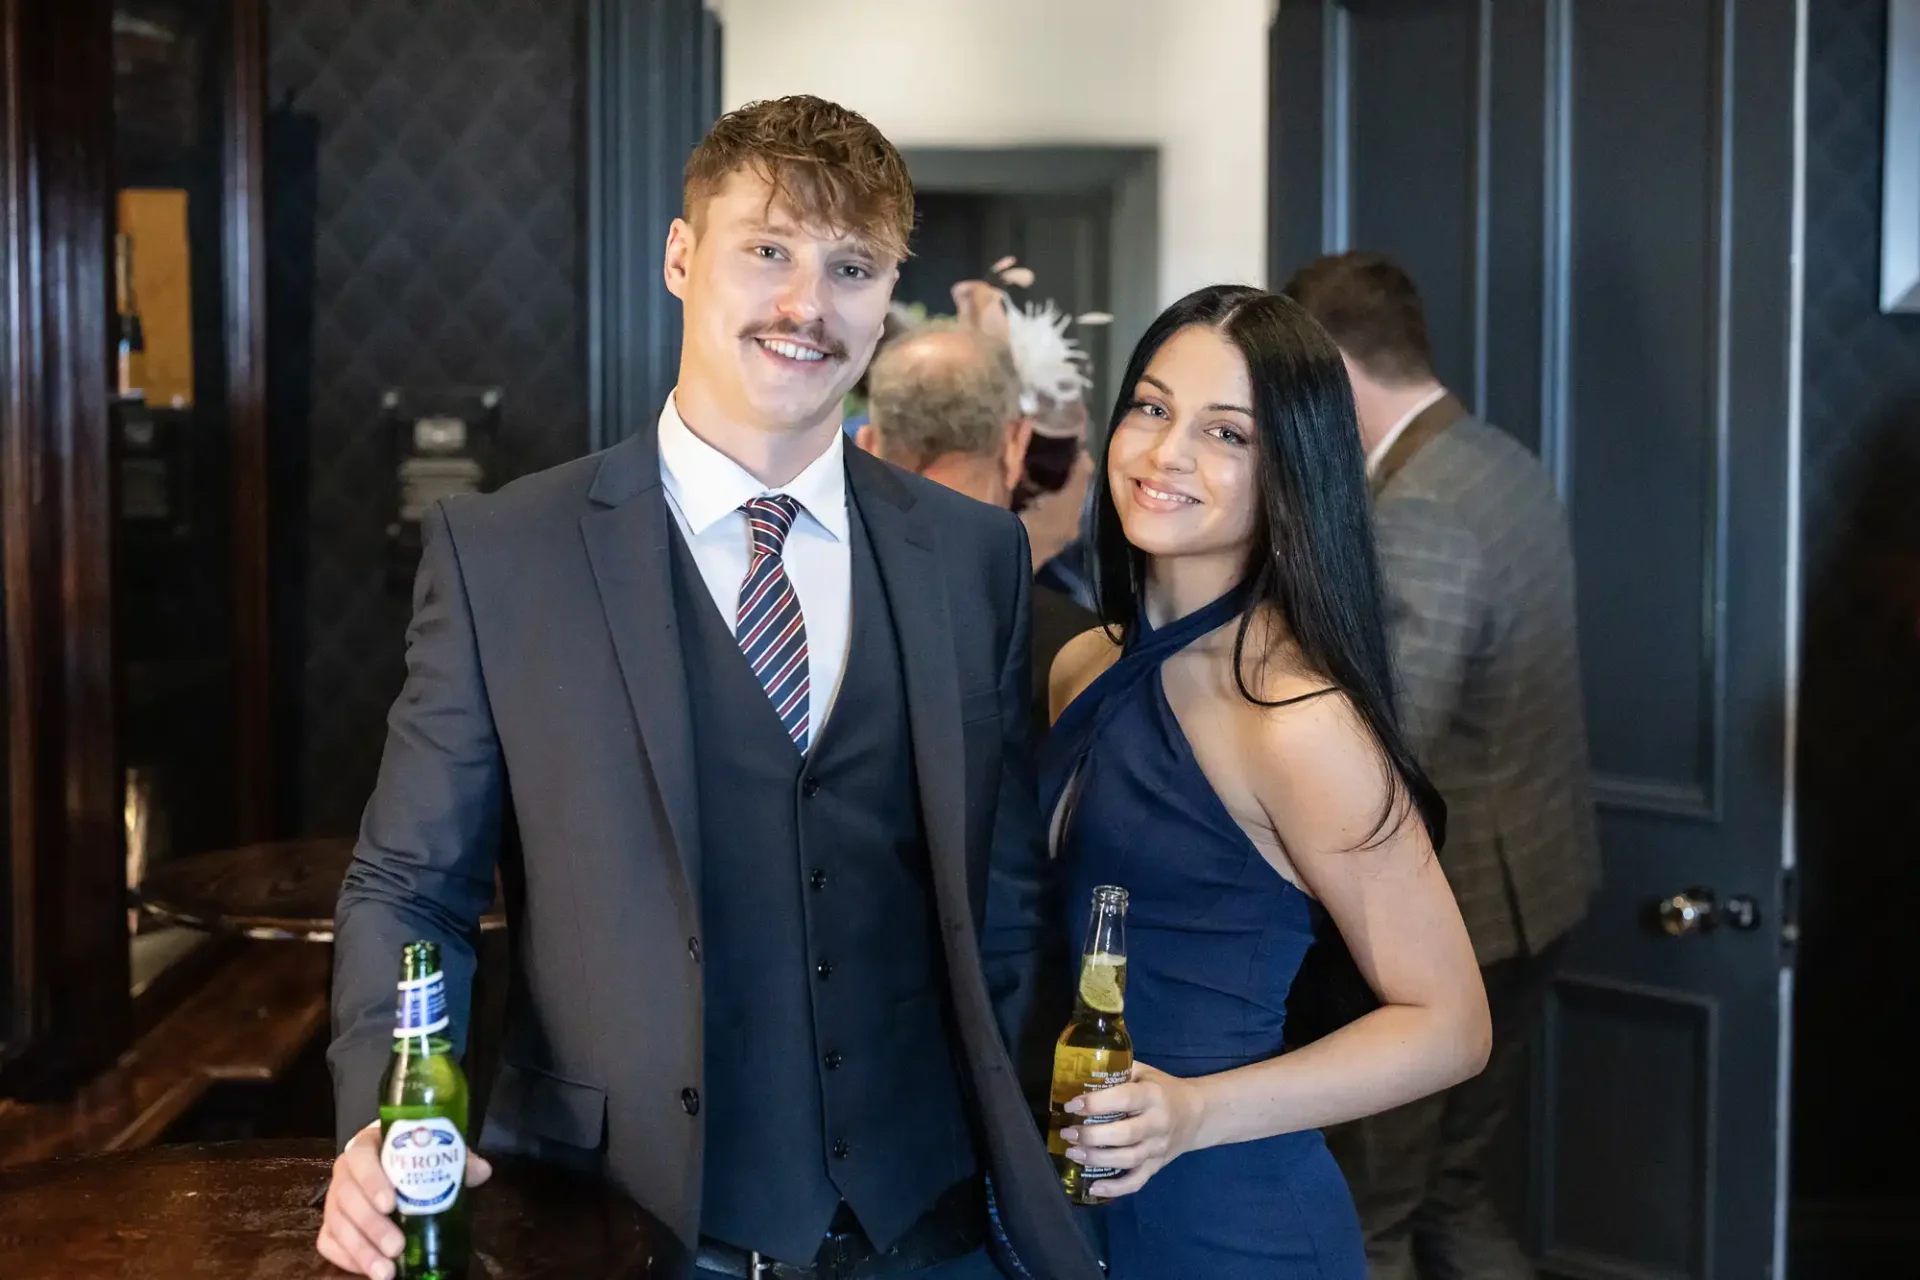 A young couple smiling at the camera, each holding a bottle of beer, at a formal indoor event.